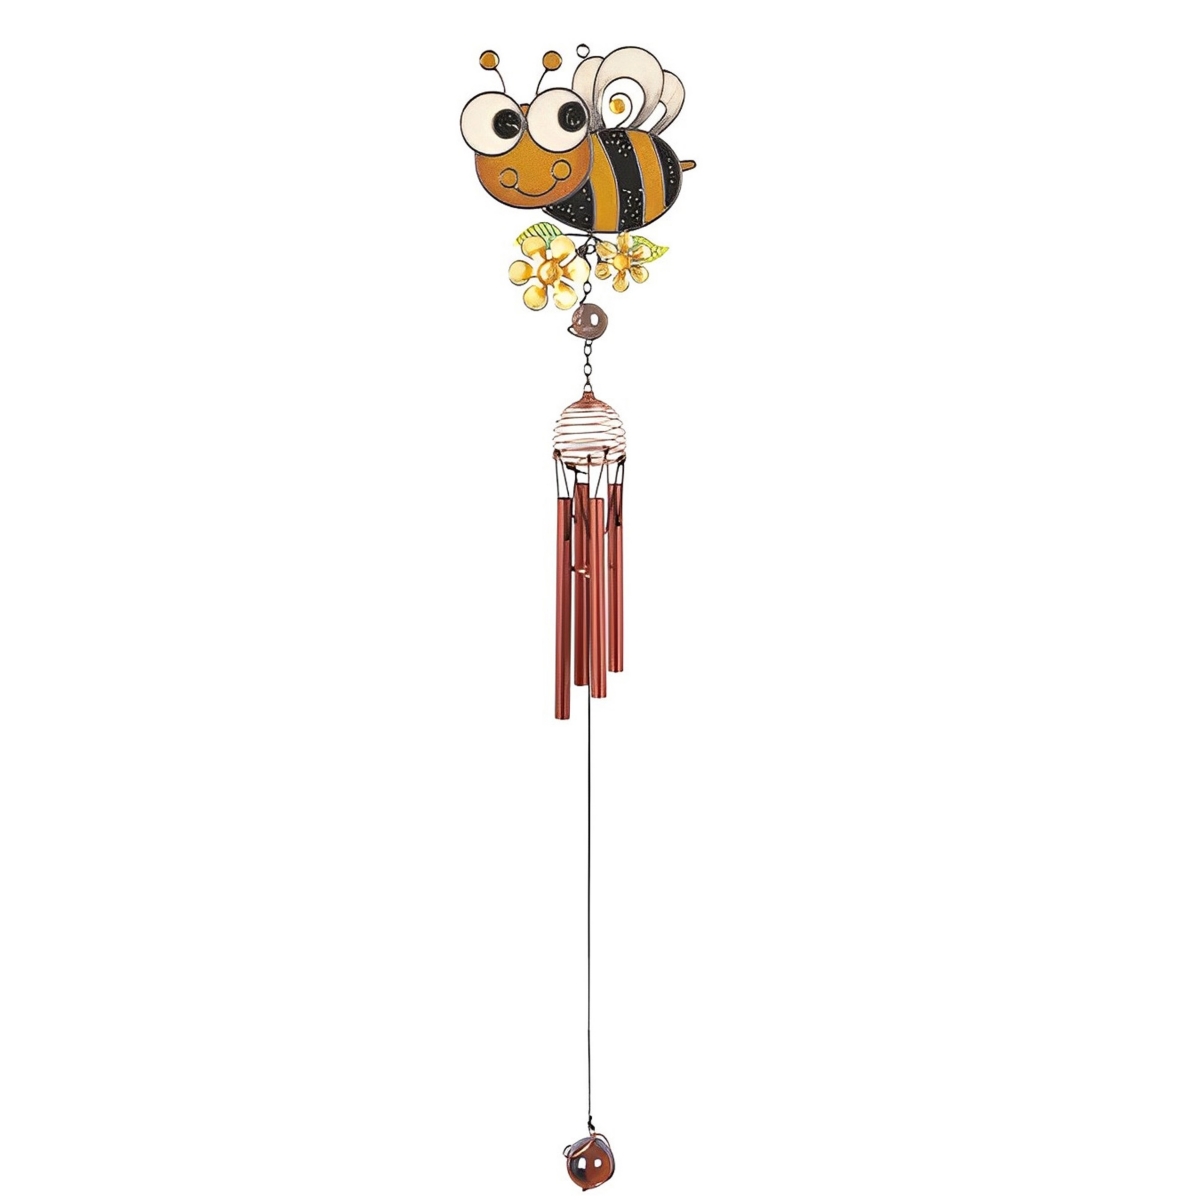 31" Long Yellow Bee Wind Chime with Copper Gem Home Decor Perfect Gift for House Warming, Holidays and Birthdays - Yellow